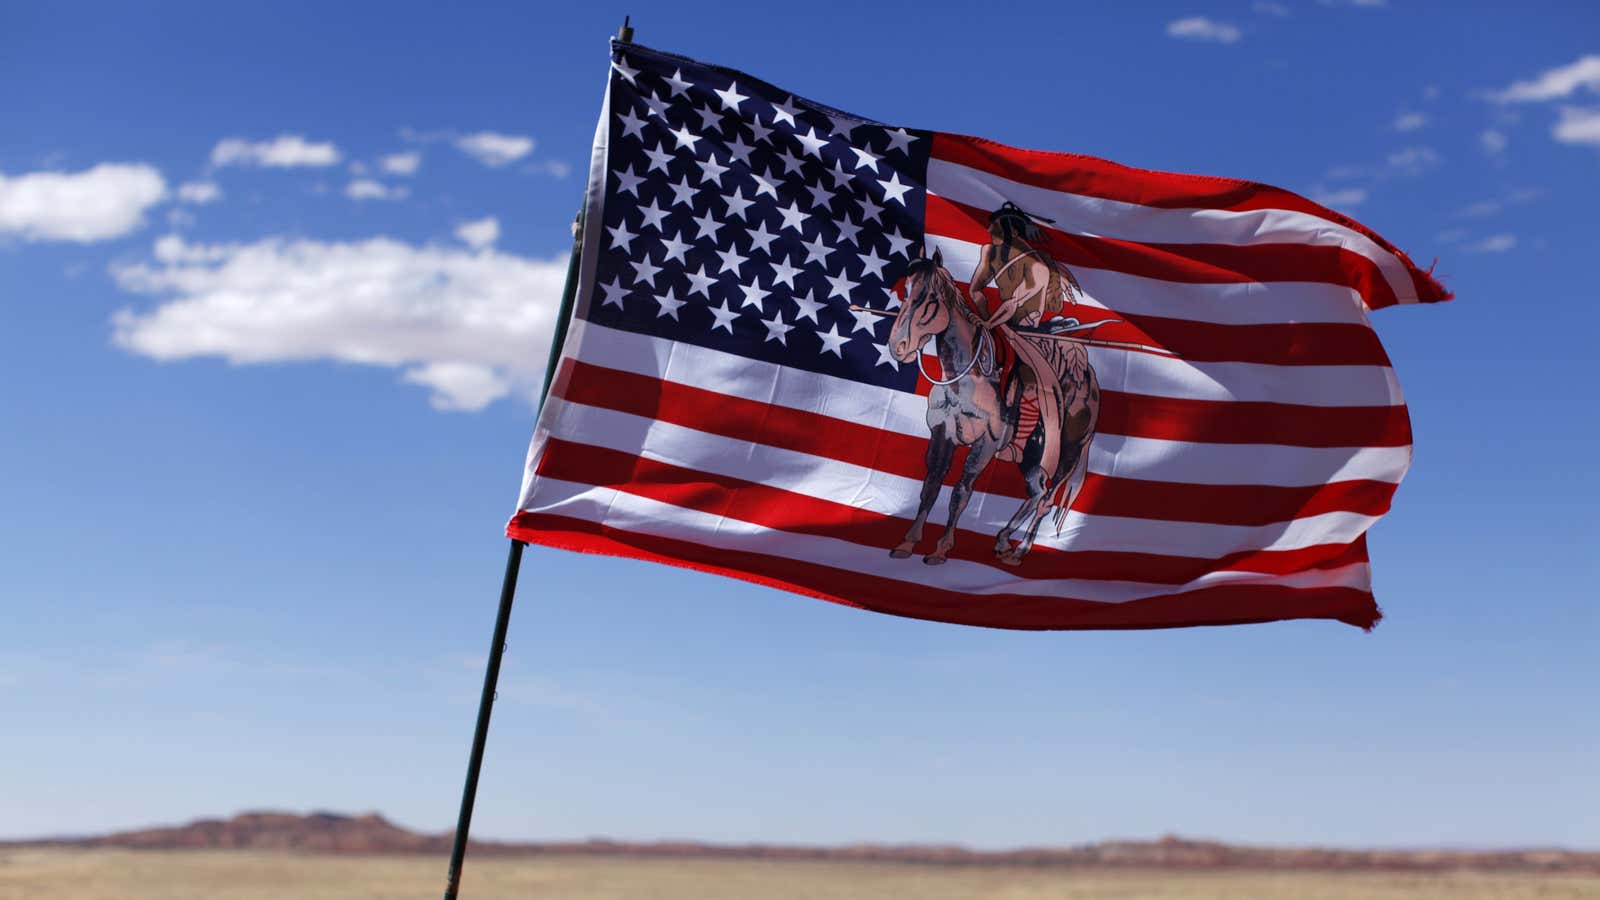 An embroidered American flag flies next to a jewelry stand on a Navajo reservation in Arizona.